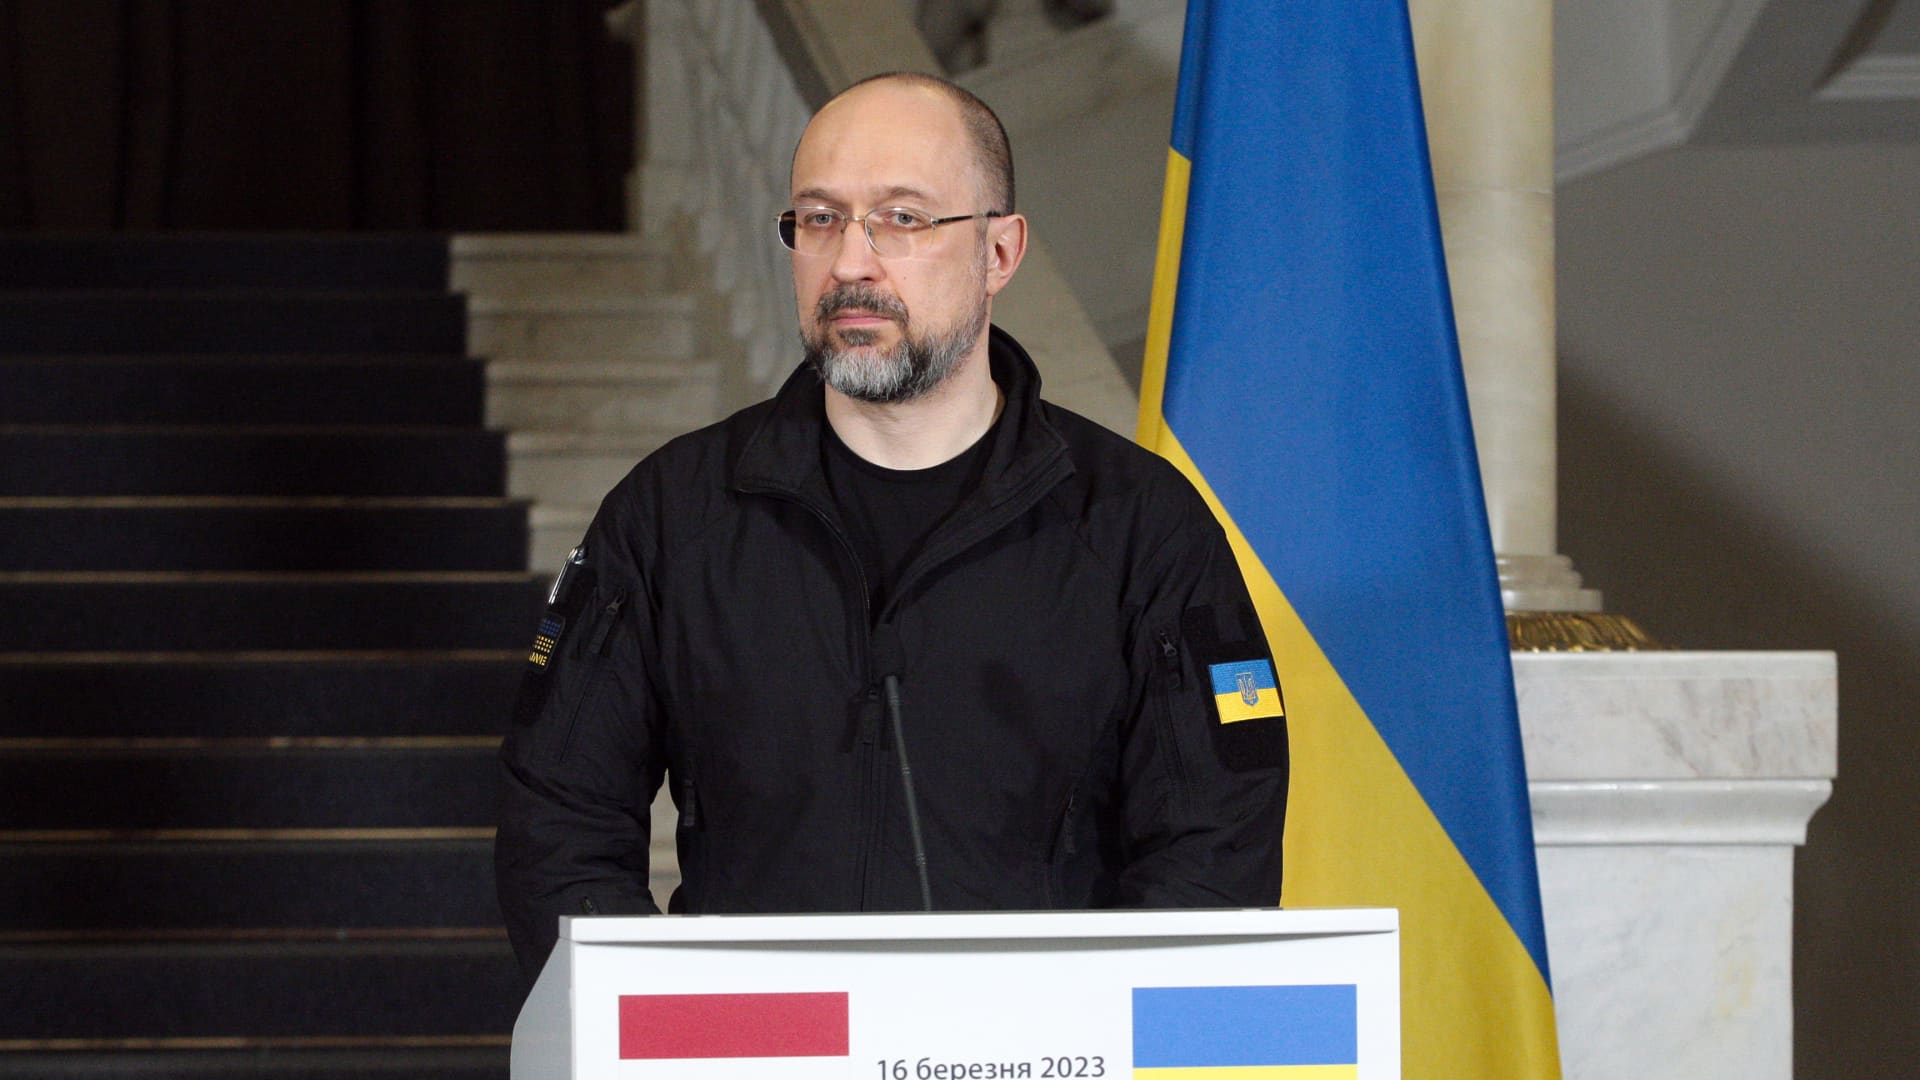 Prime Minister of Ukraine Denys Shmyhal attending a press conference in Kyiv on March 16, 2023.